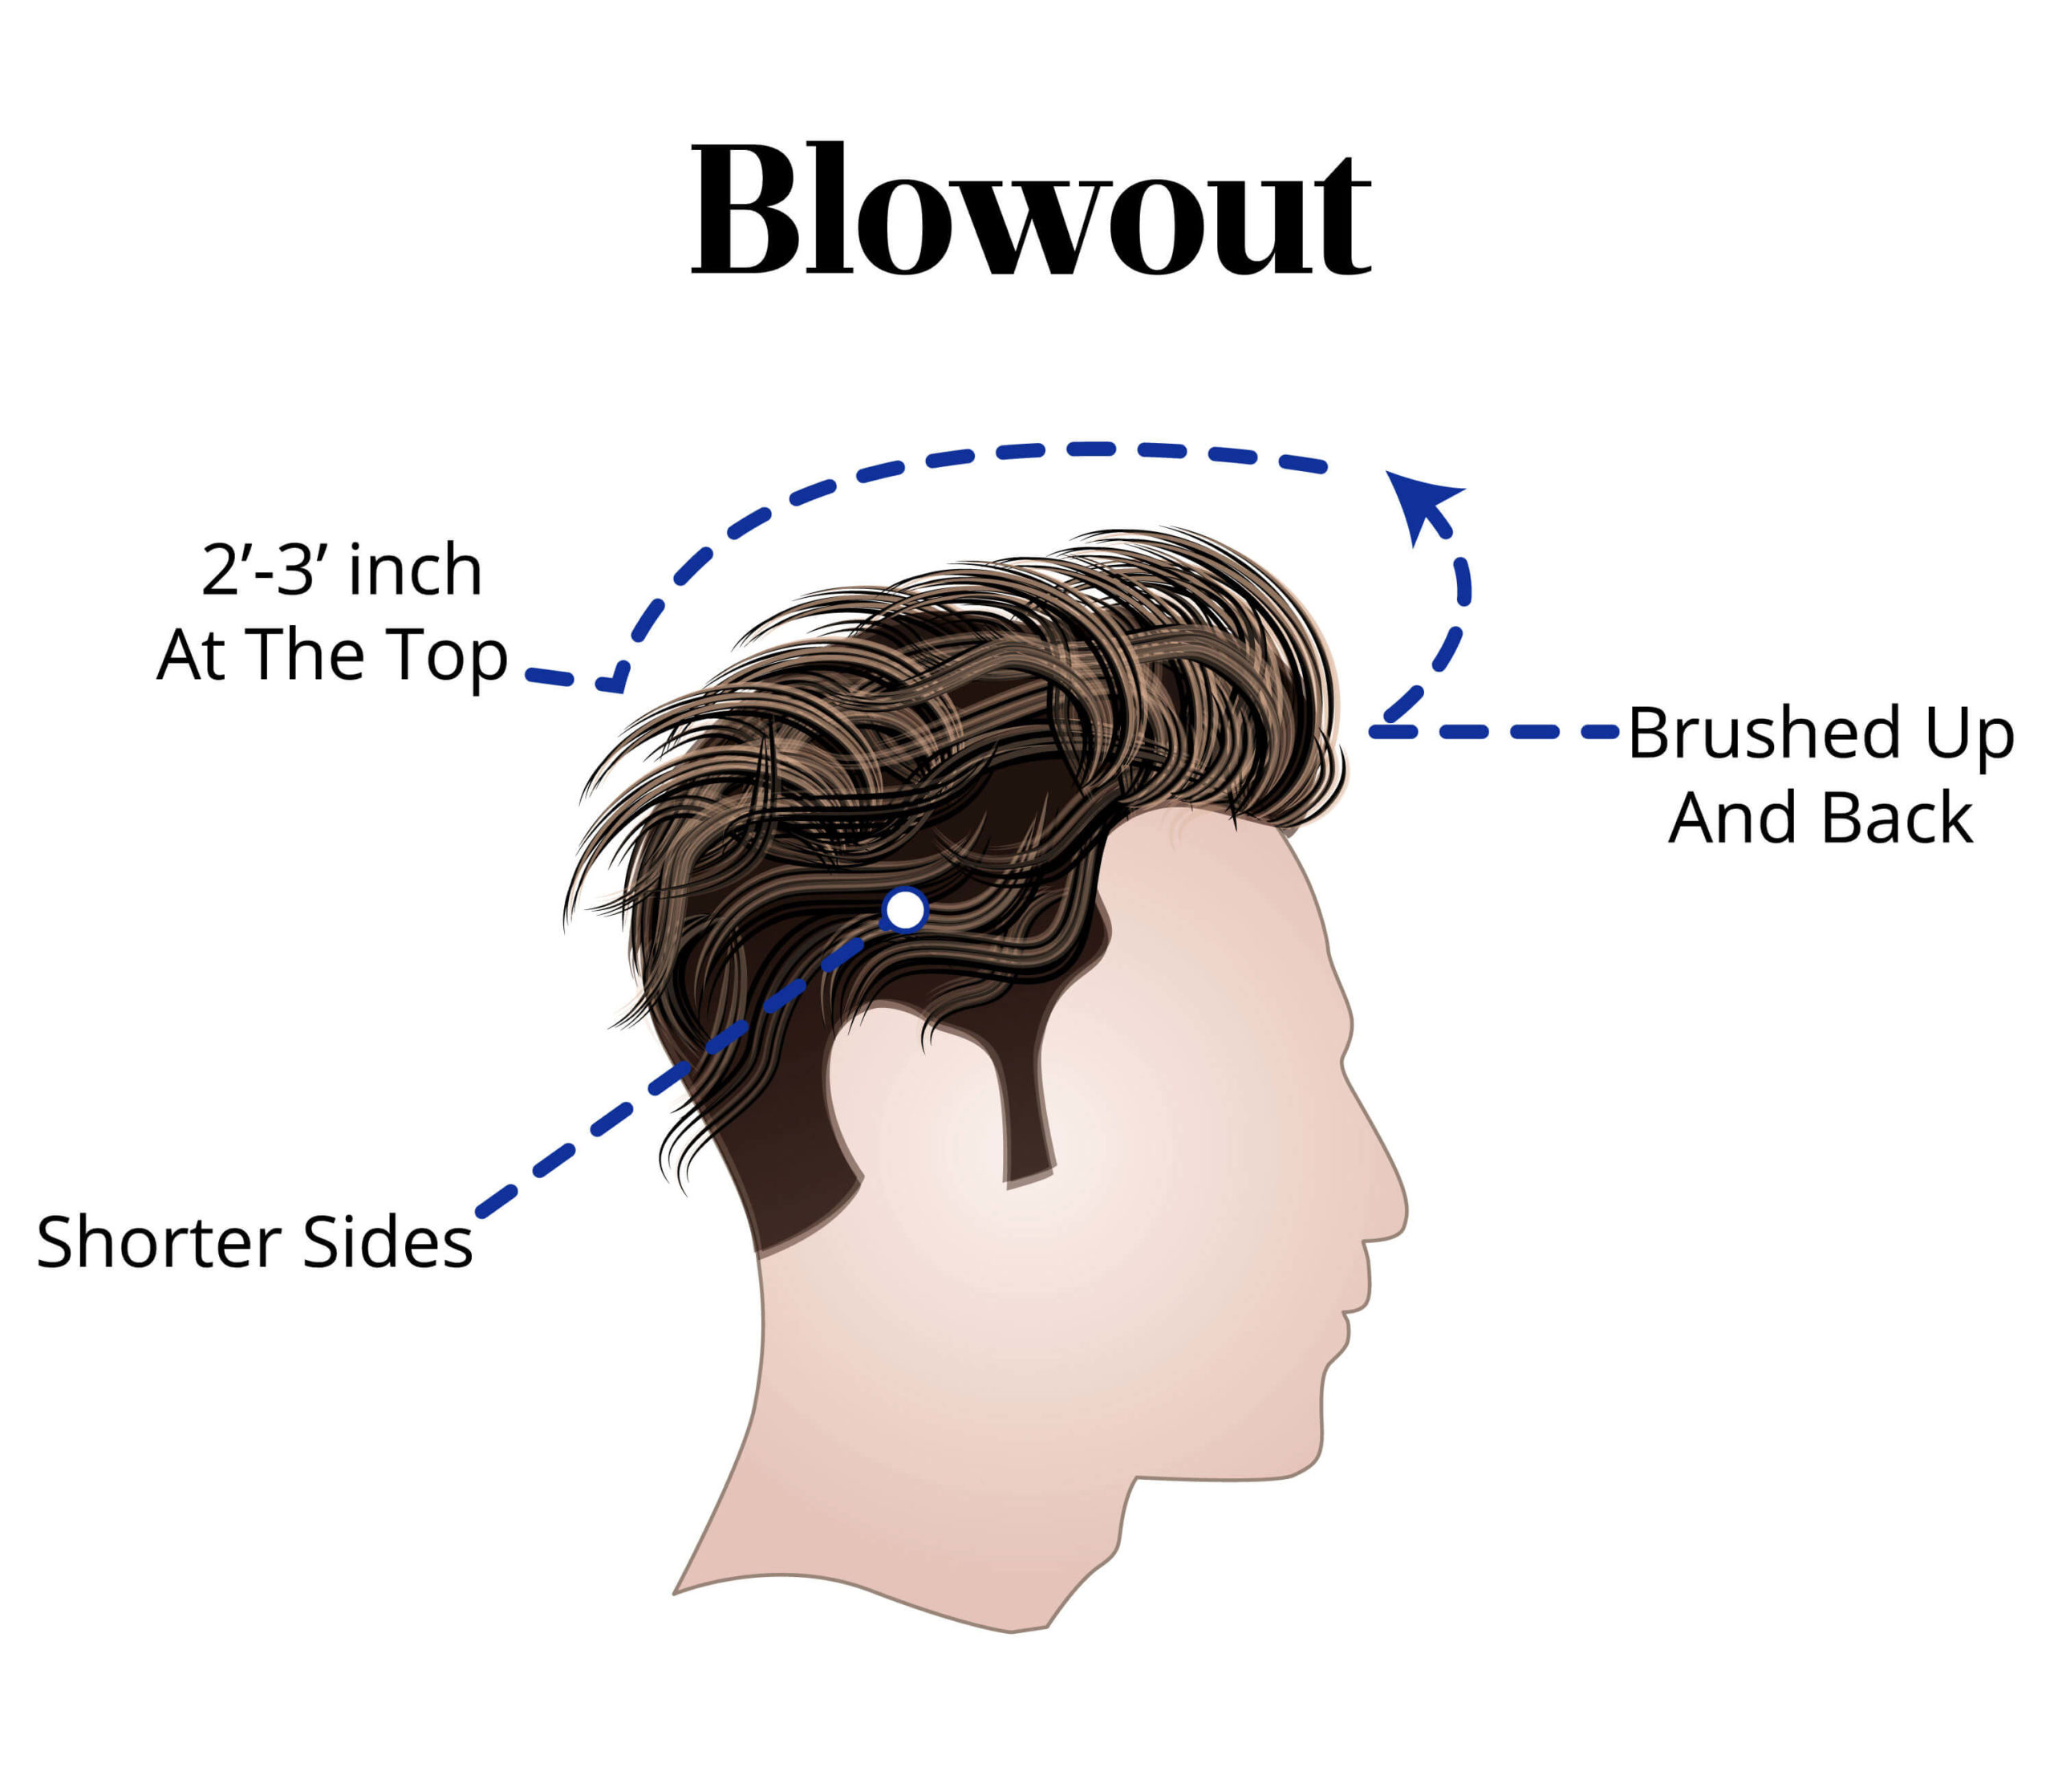 best men's hairstyle for teens is the blowout